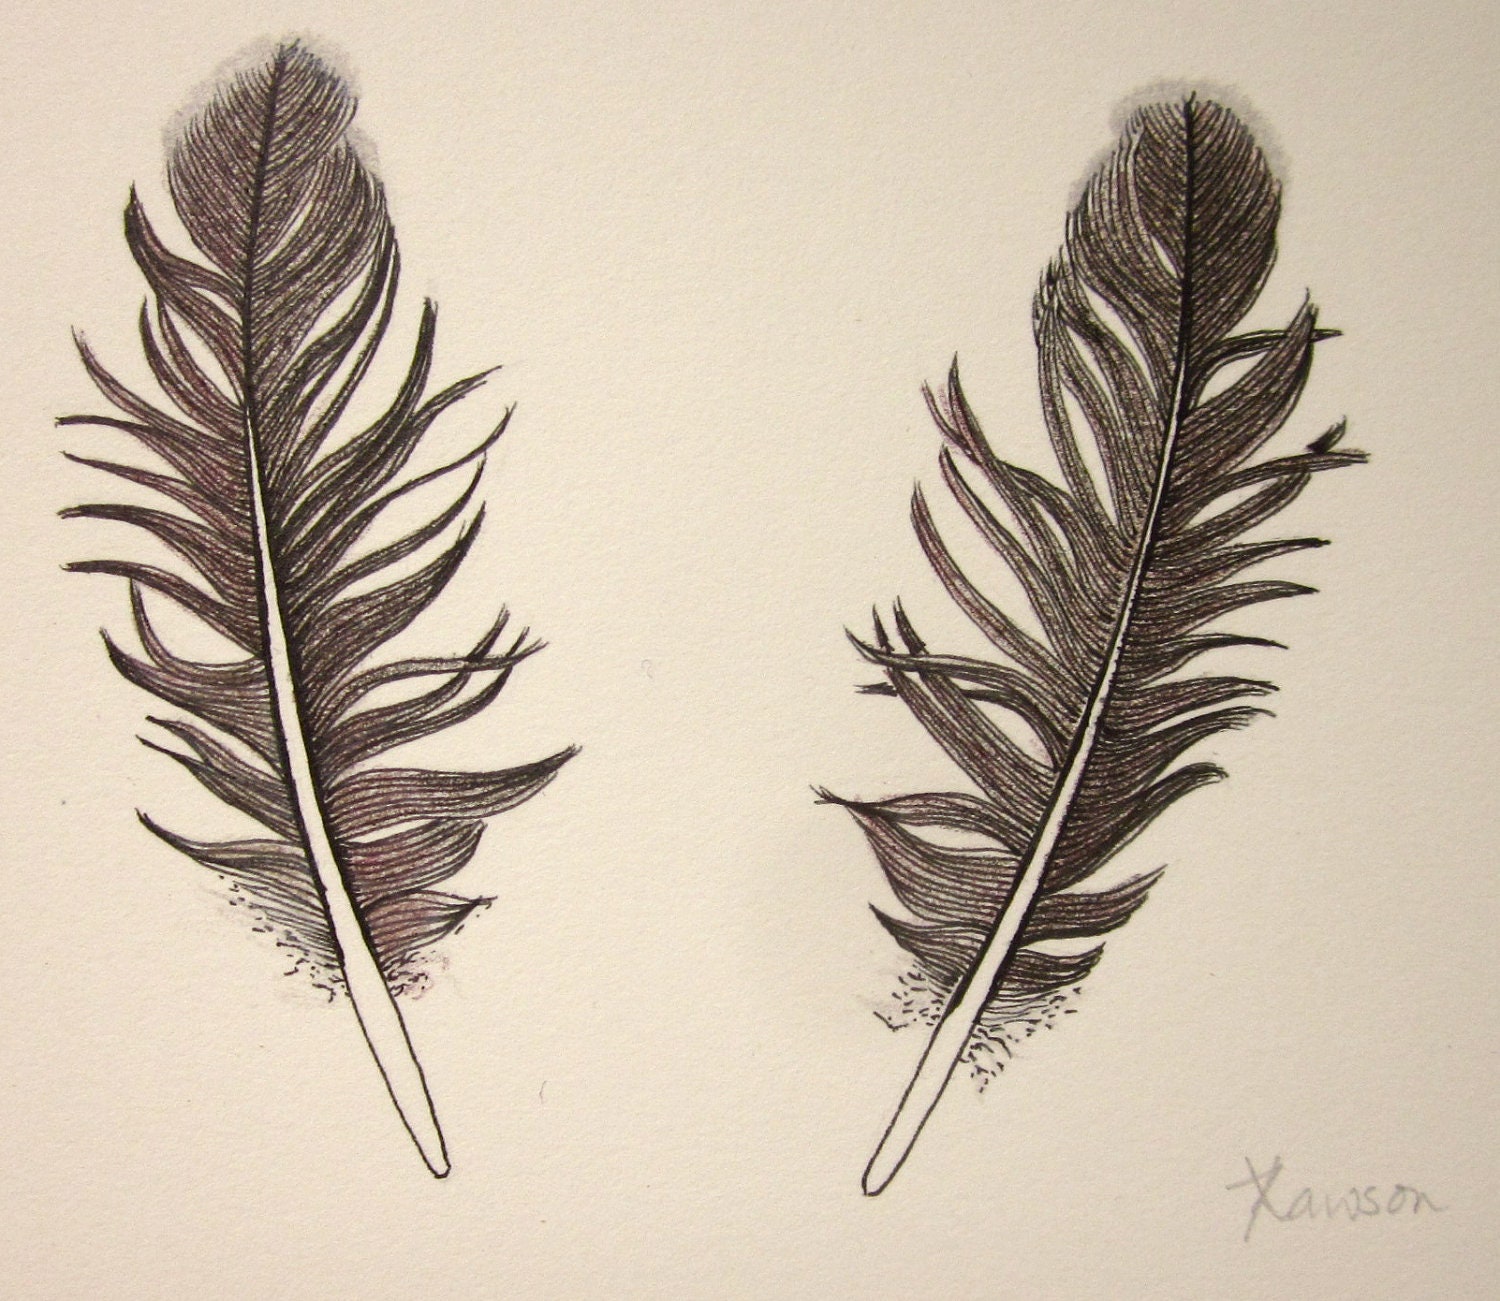 2 Black Feathers original pen and ink drawing by anne4bags